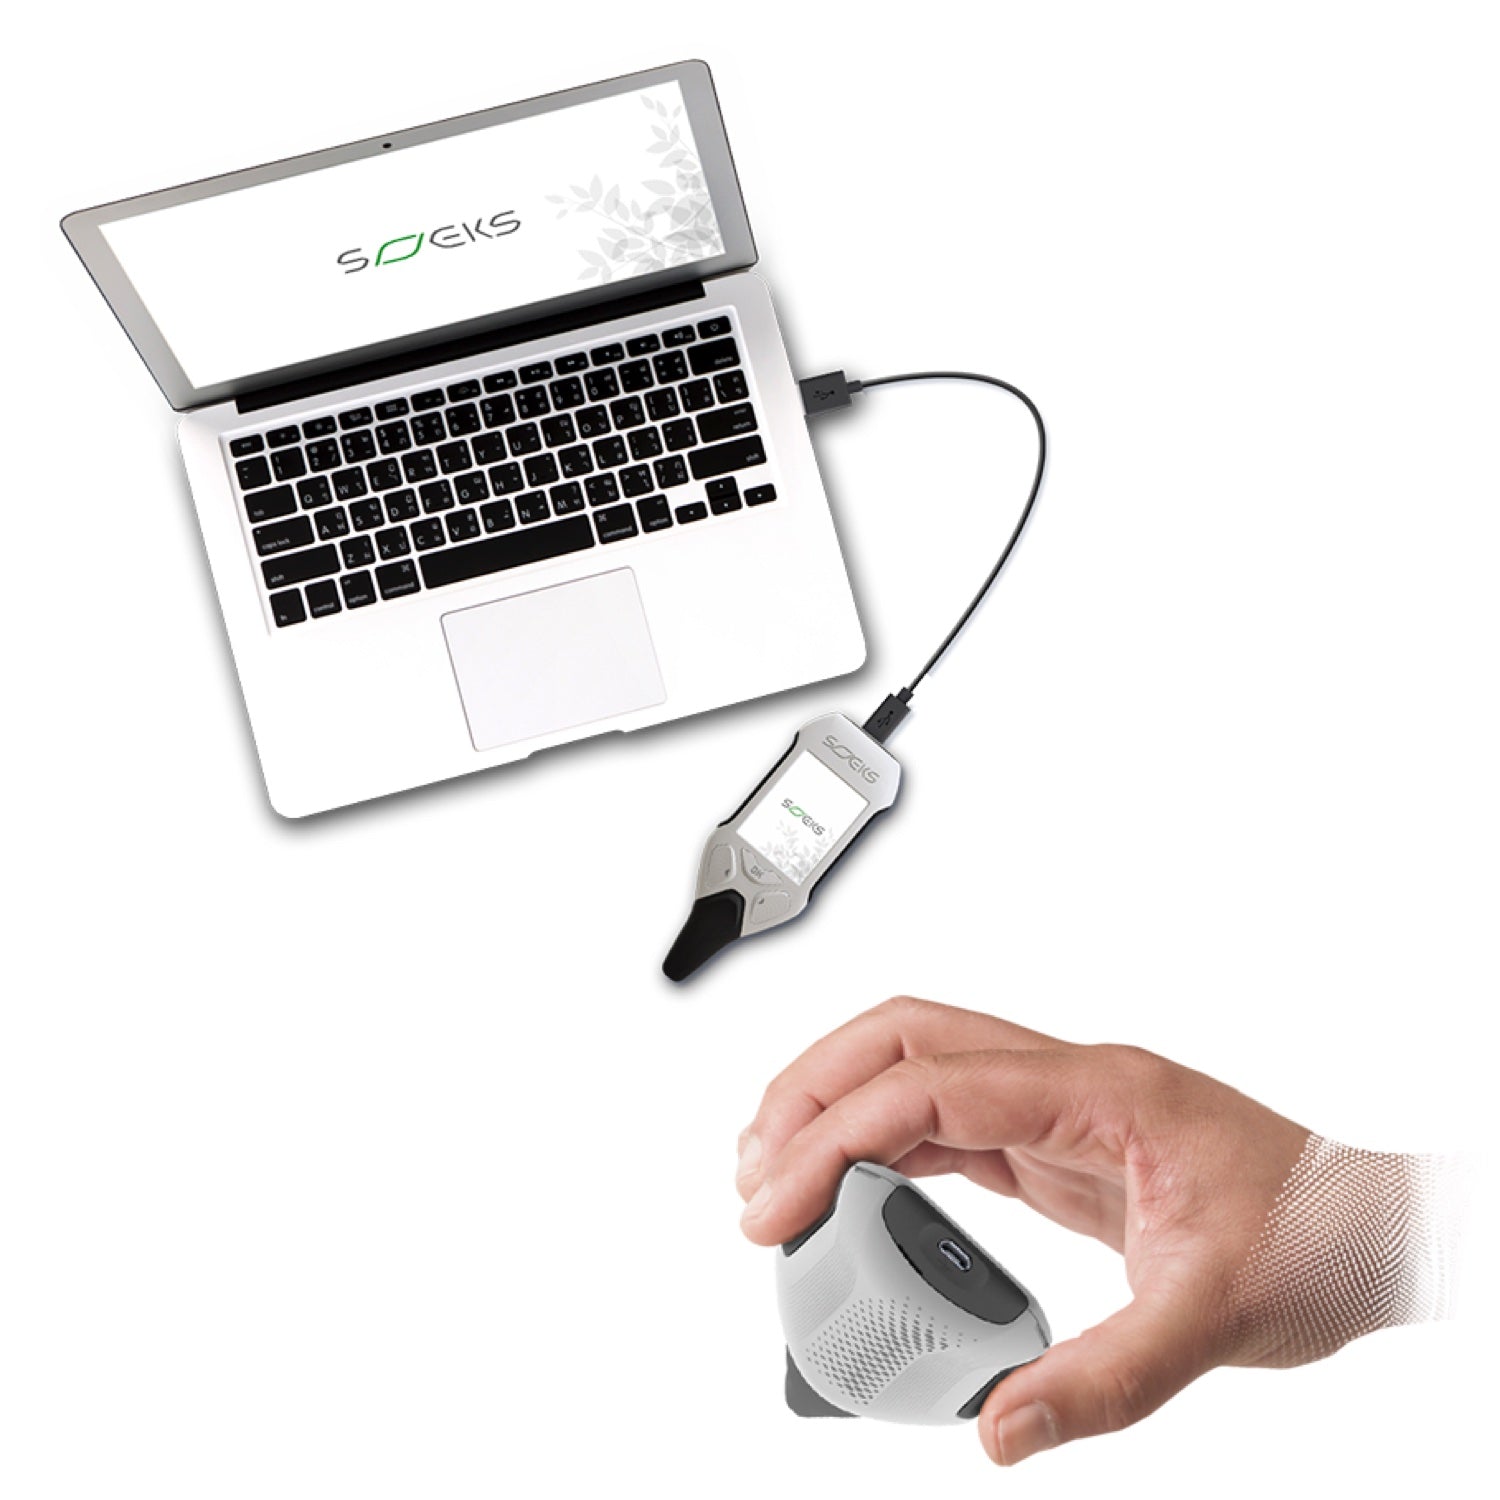 EcoVisor F4 - Soeks.Store - connects the device to a computer